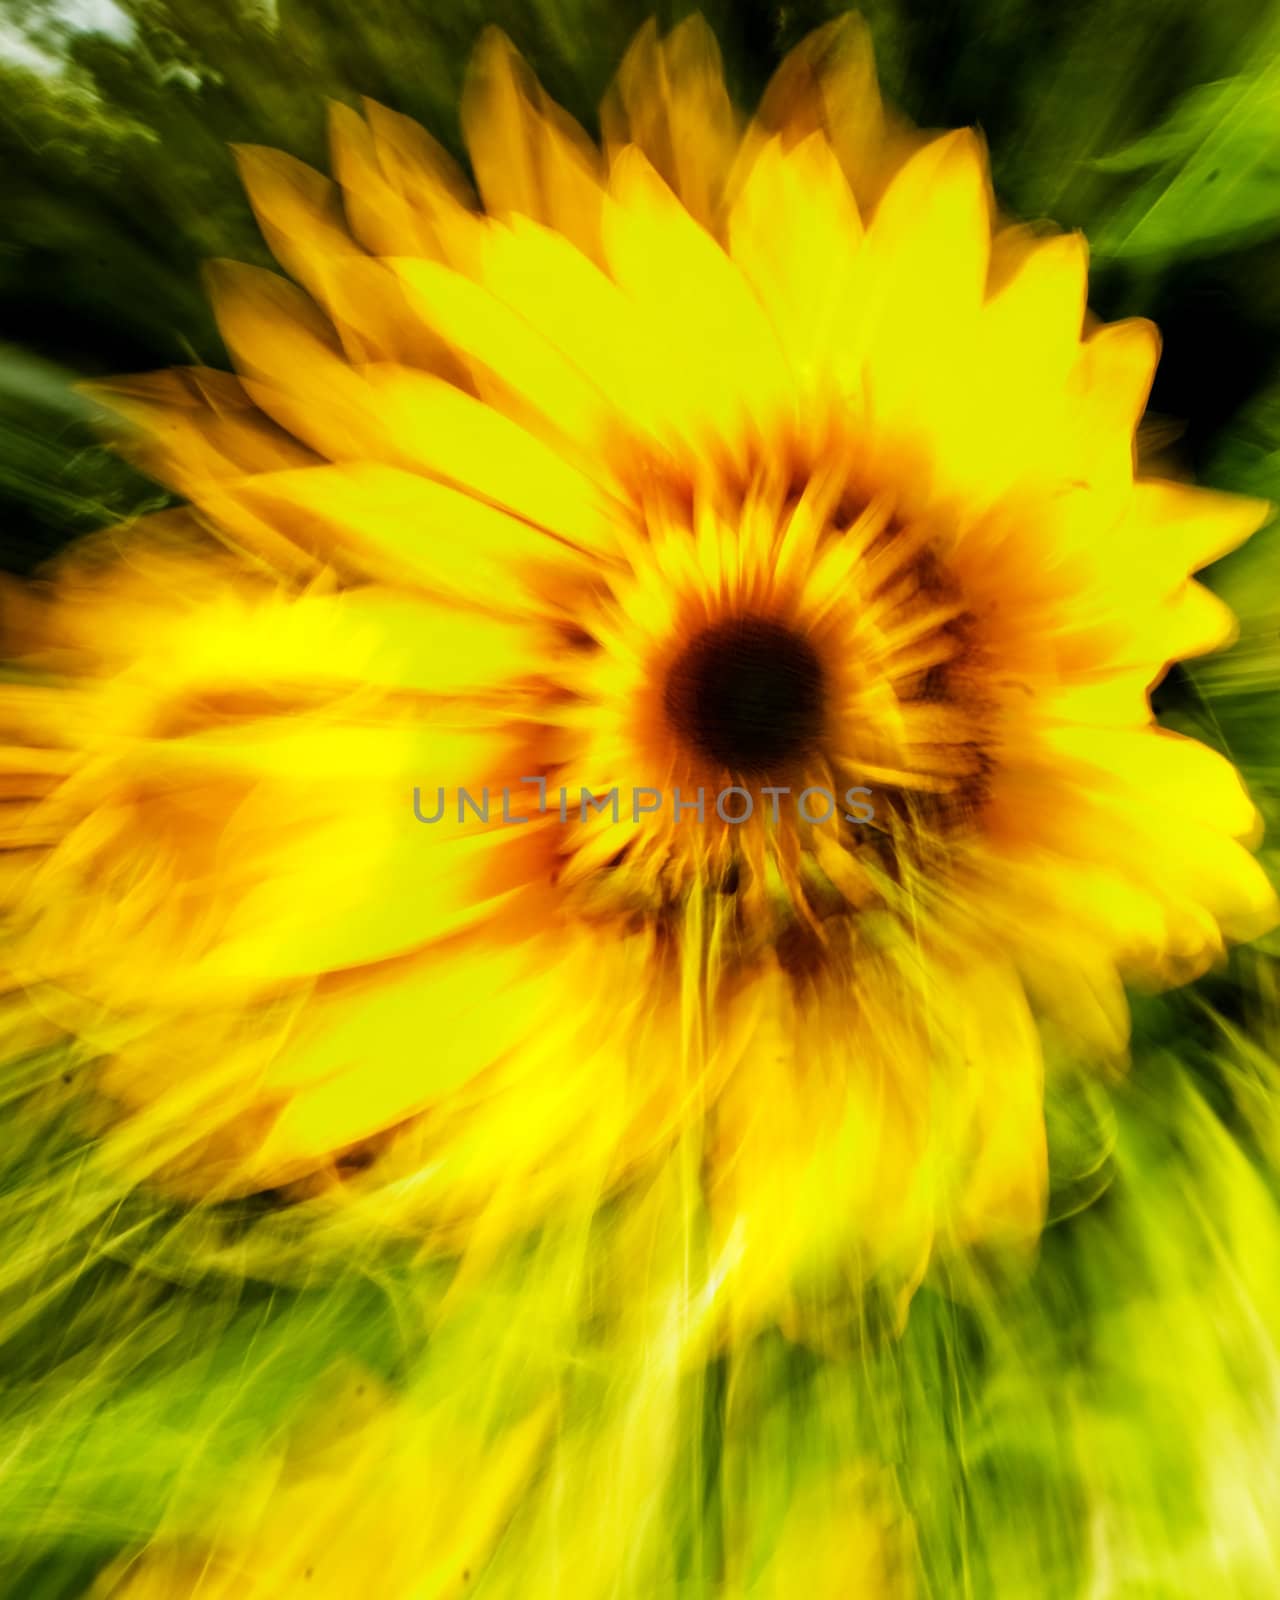 Sunflower Abstract 1 by chimmi